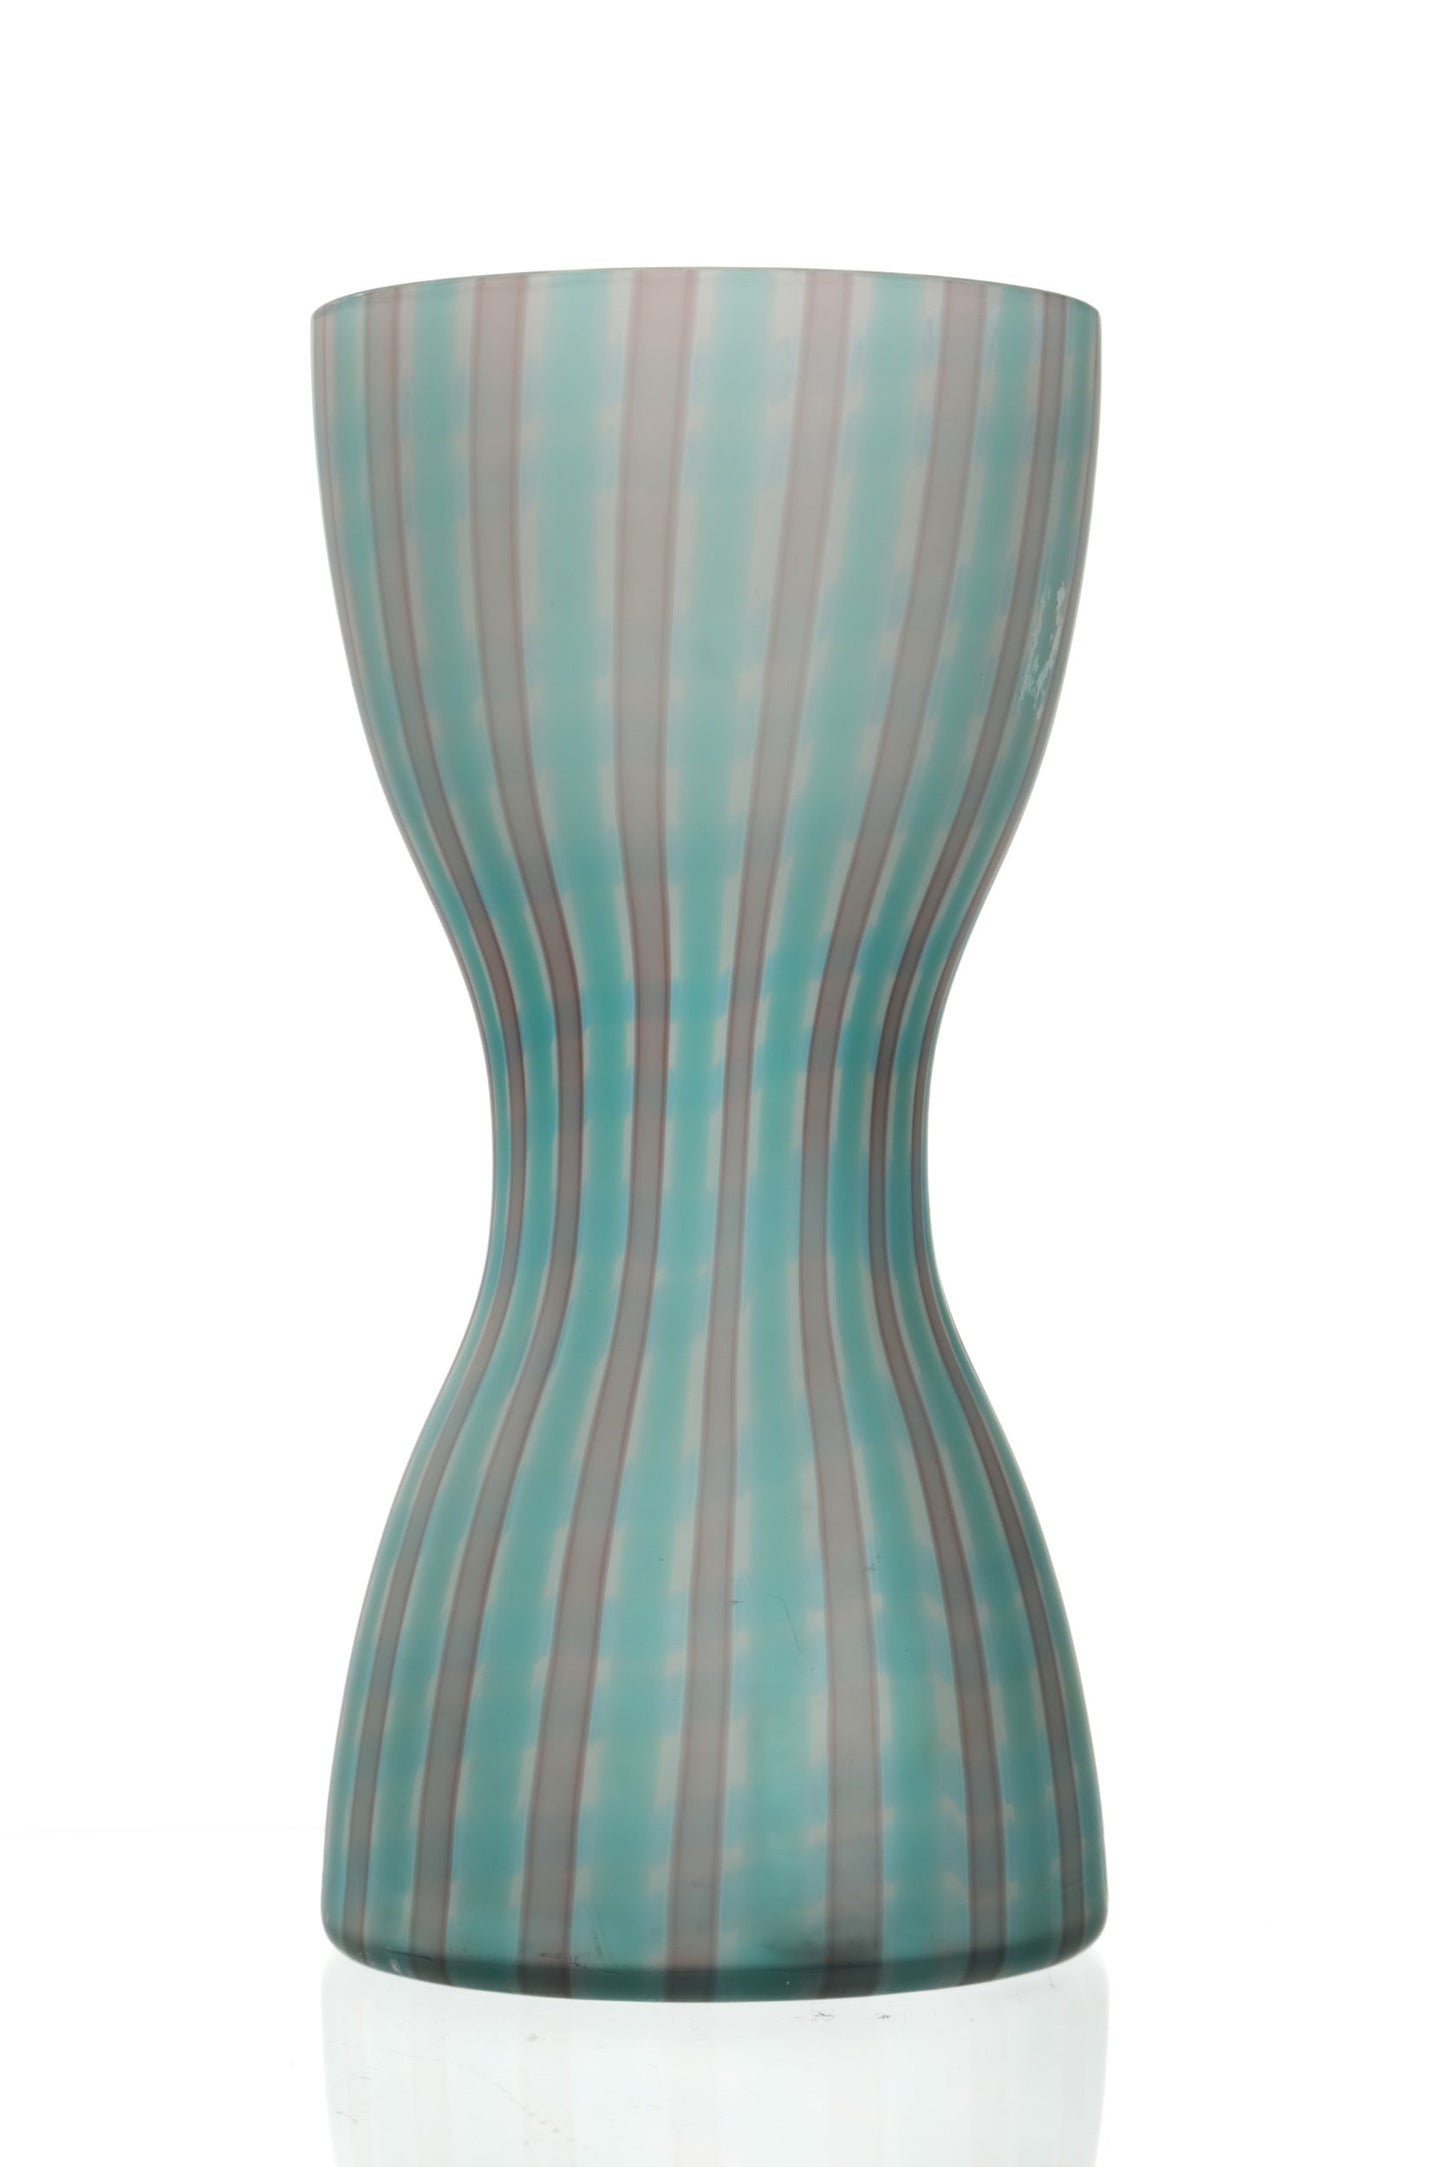 Murano glass vase from the 80s